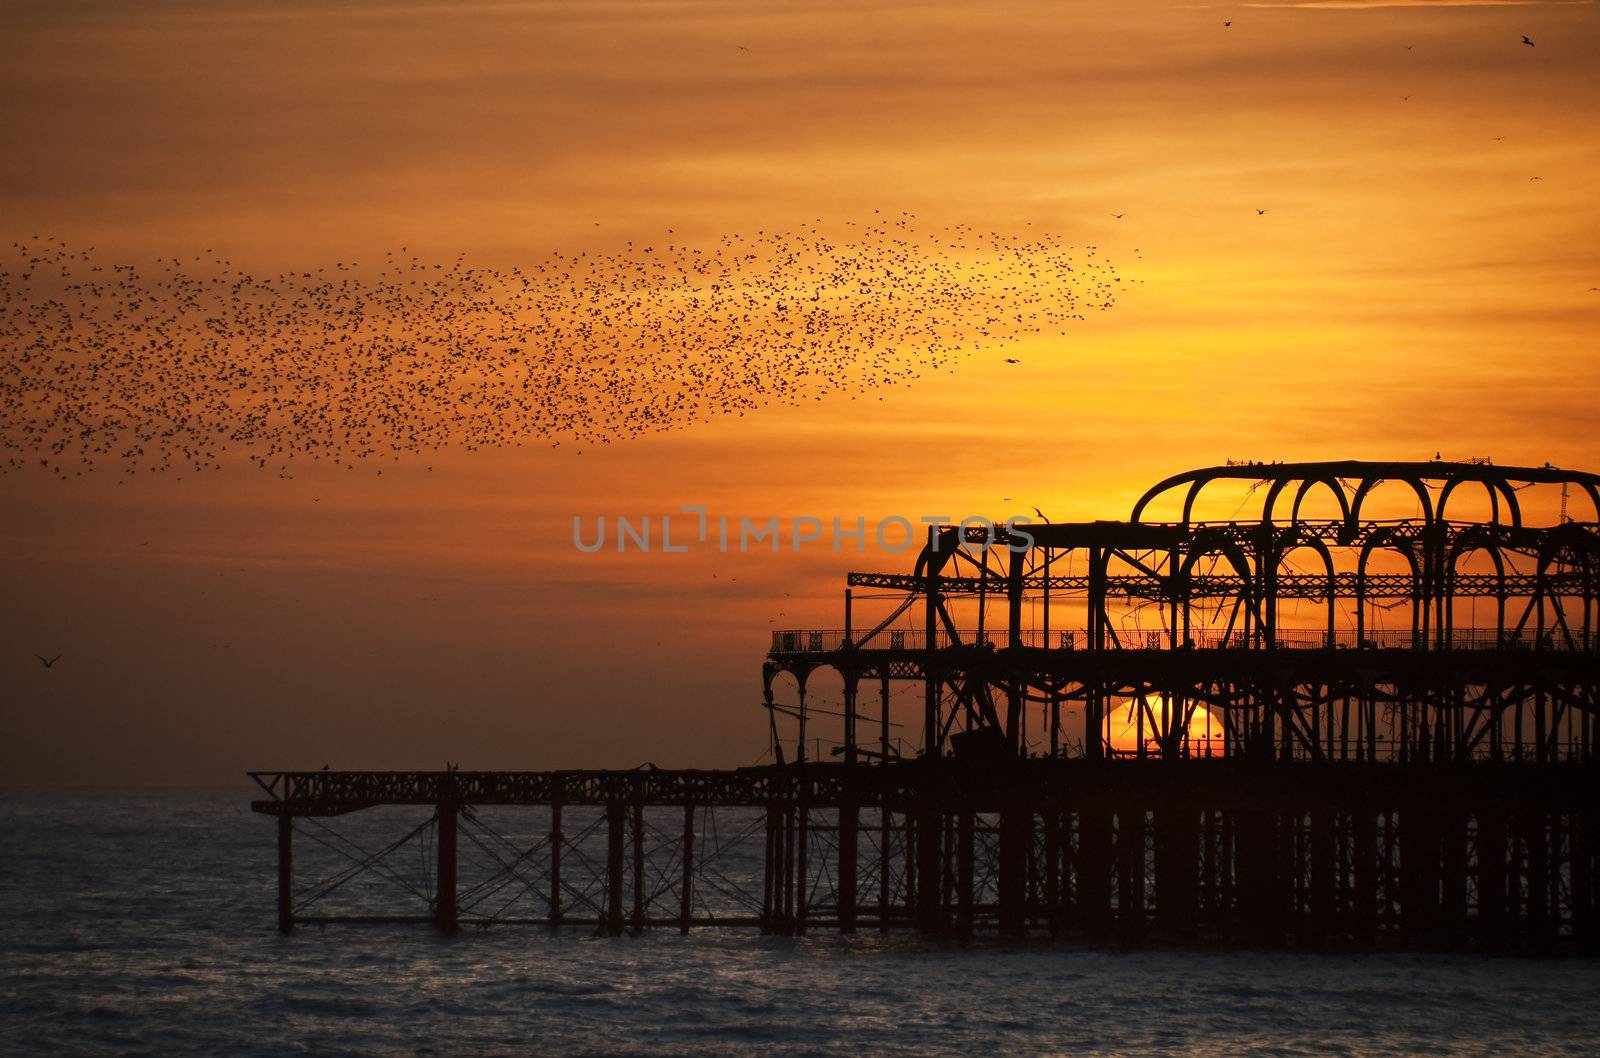 Flock of starlings over the West Pier in Brighton at sunset by dutourdumonde